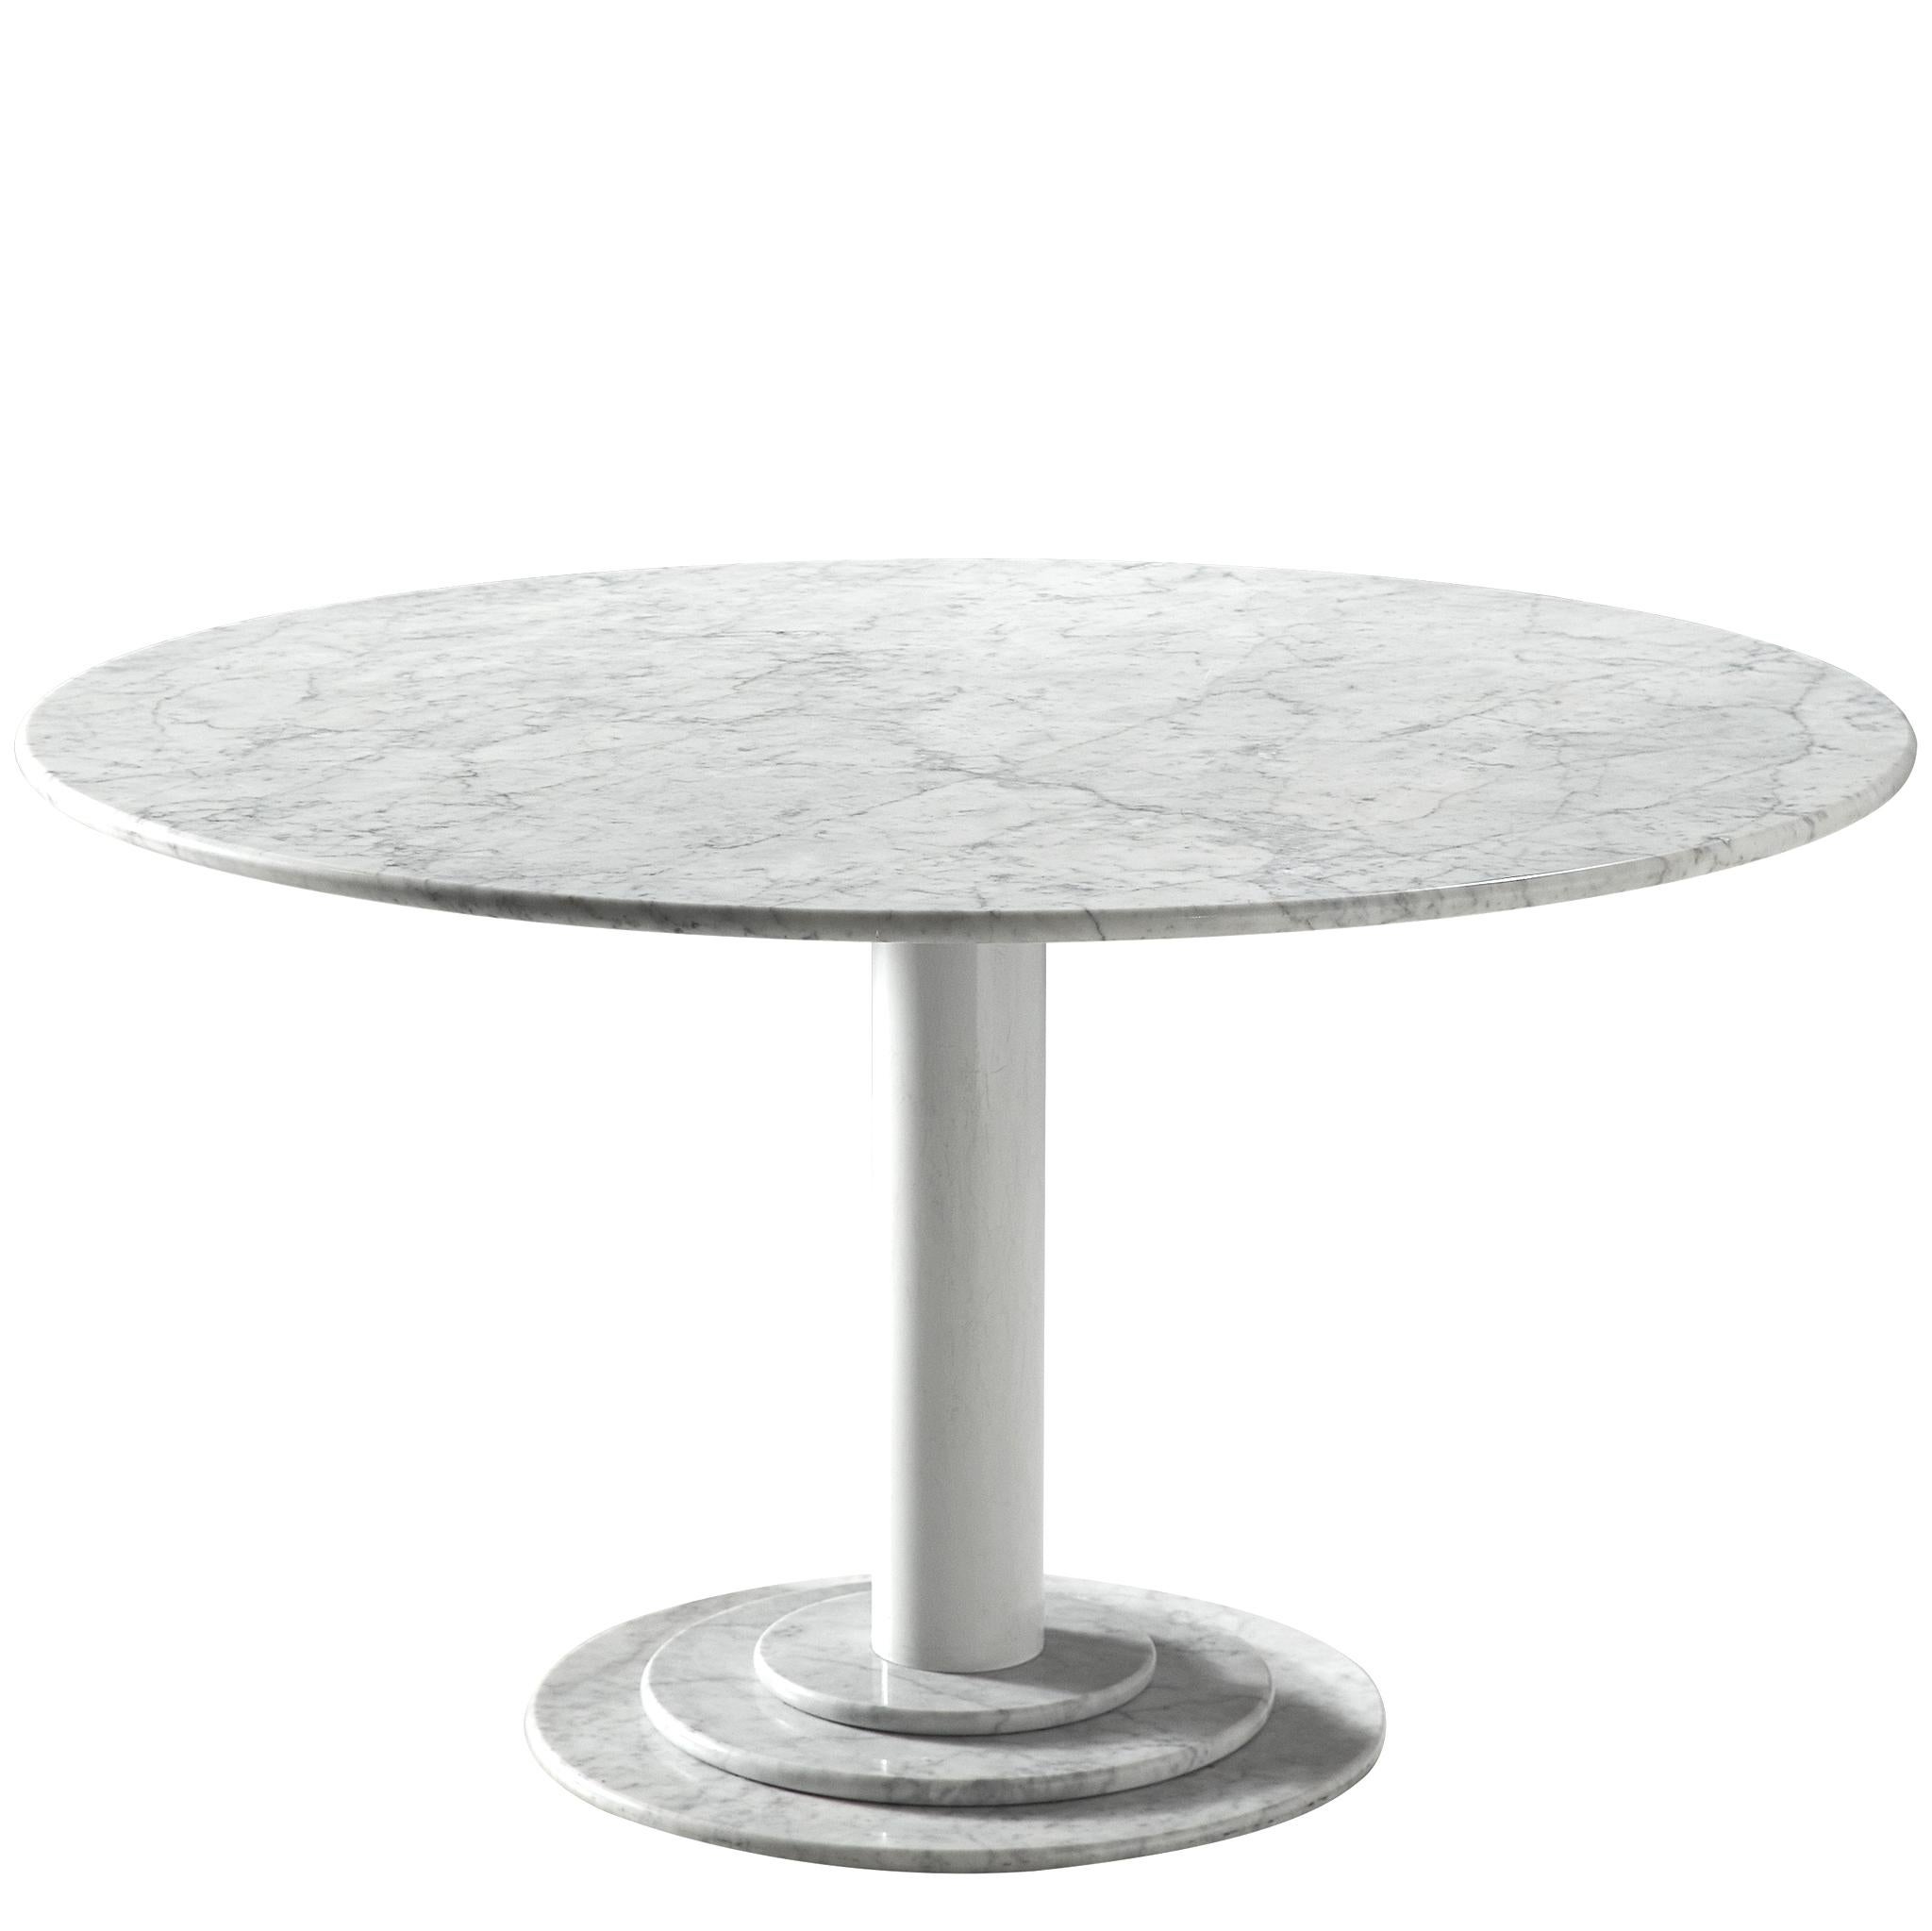 Round White Marble Centre Table, Italy